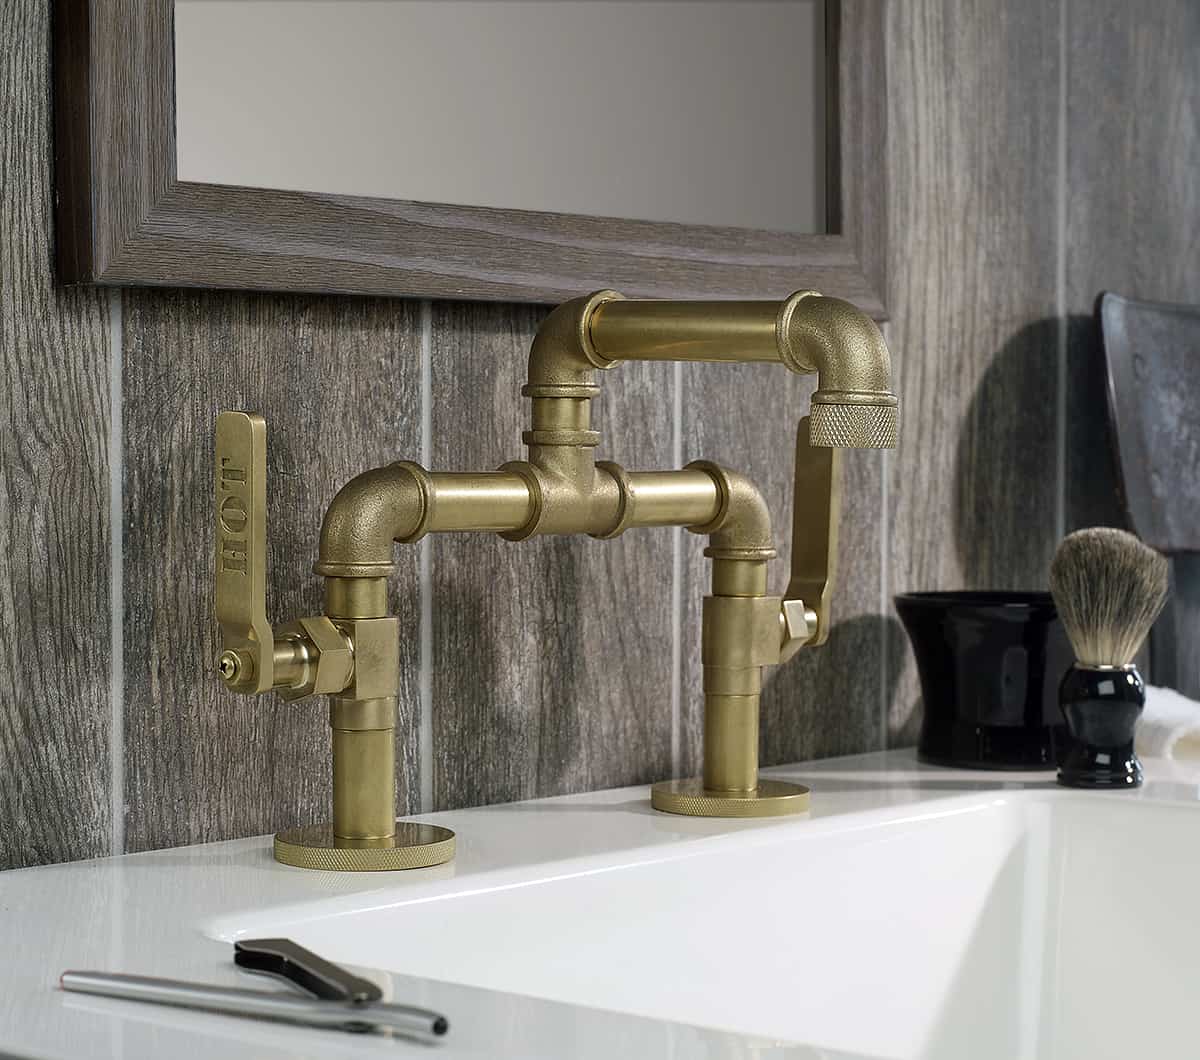 Industrial Style Faucets by Watermark to Give Your ...
